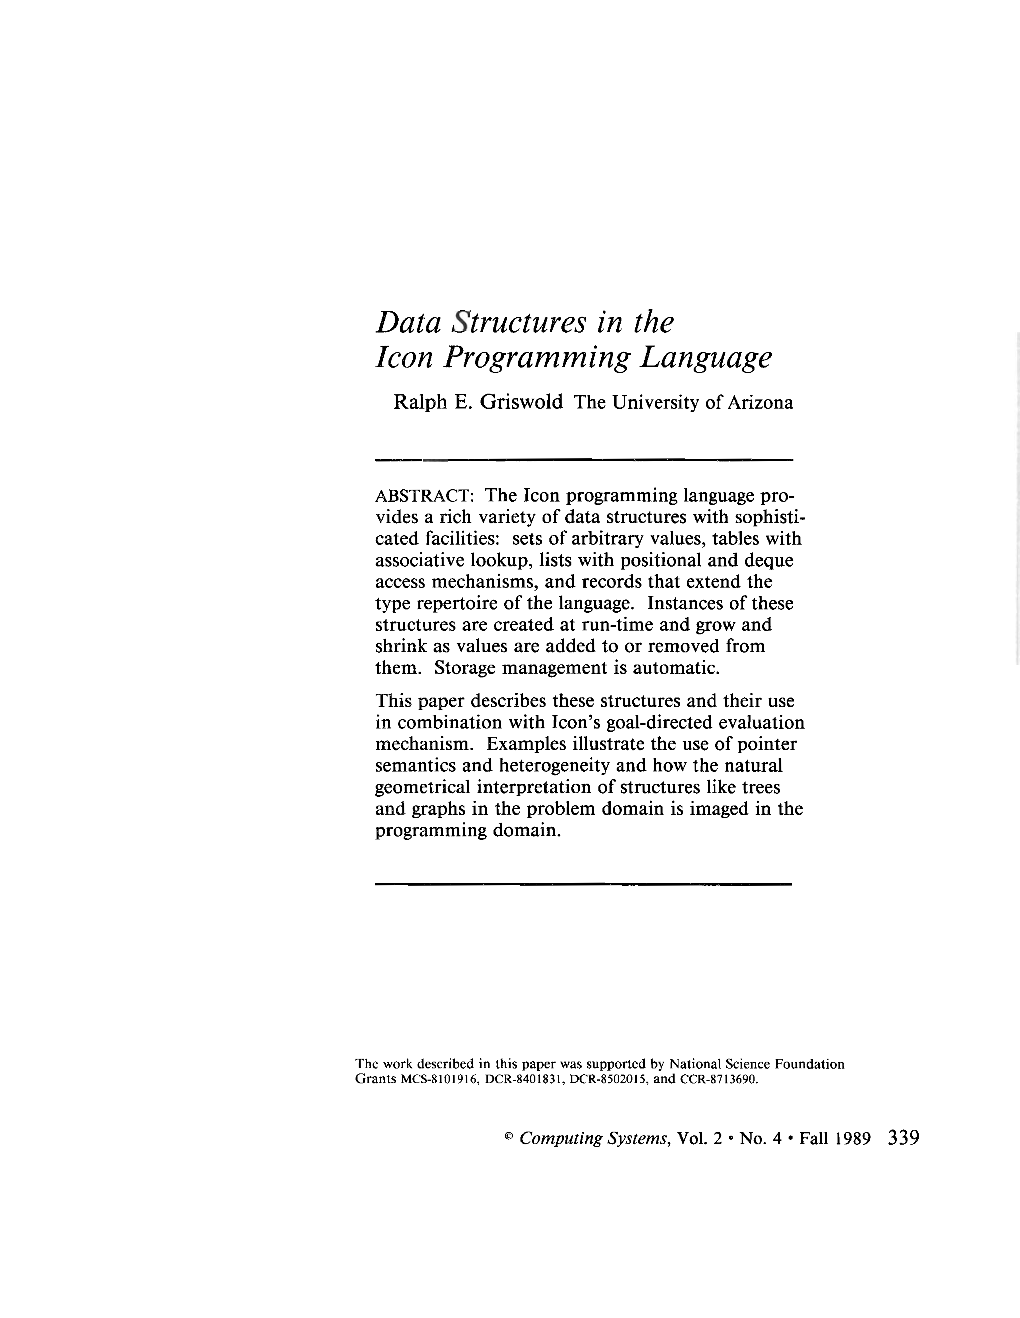 Data Struclures in the Icon Programming Language